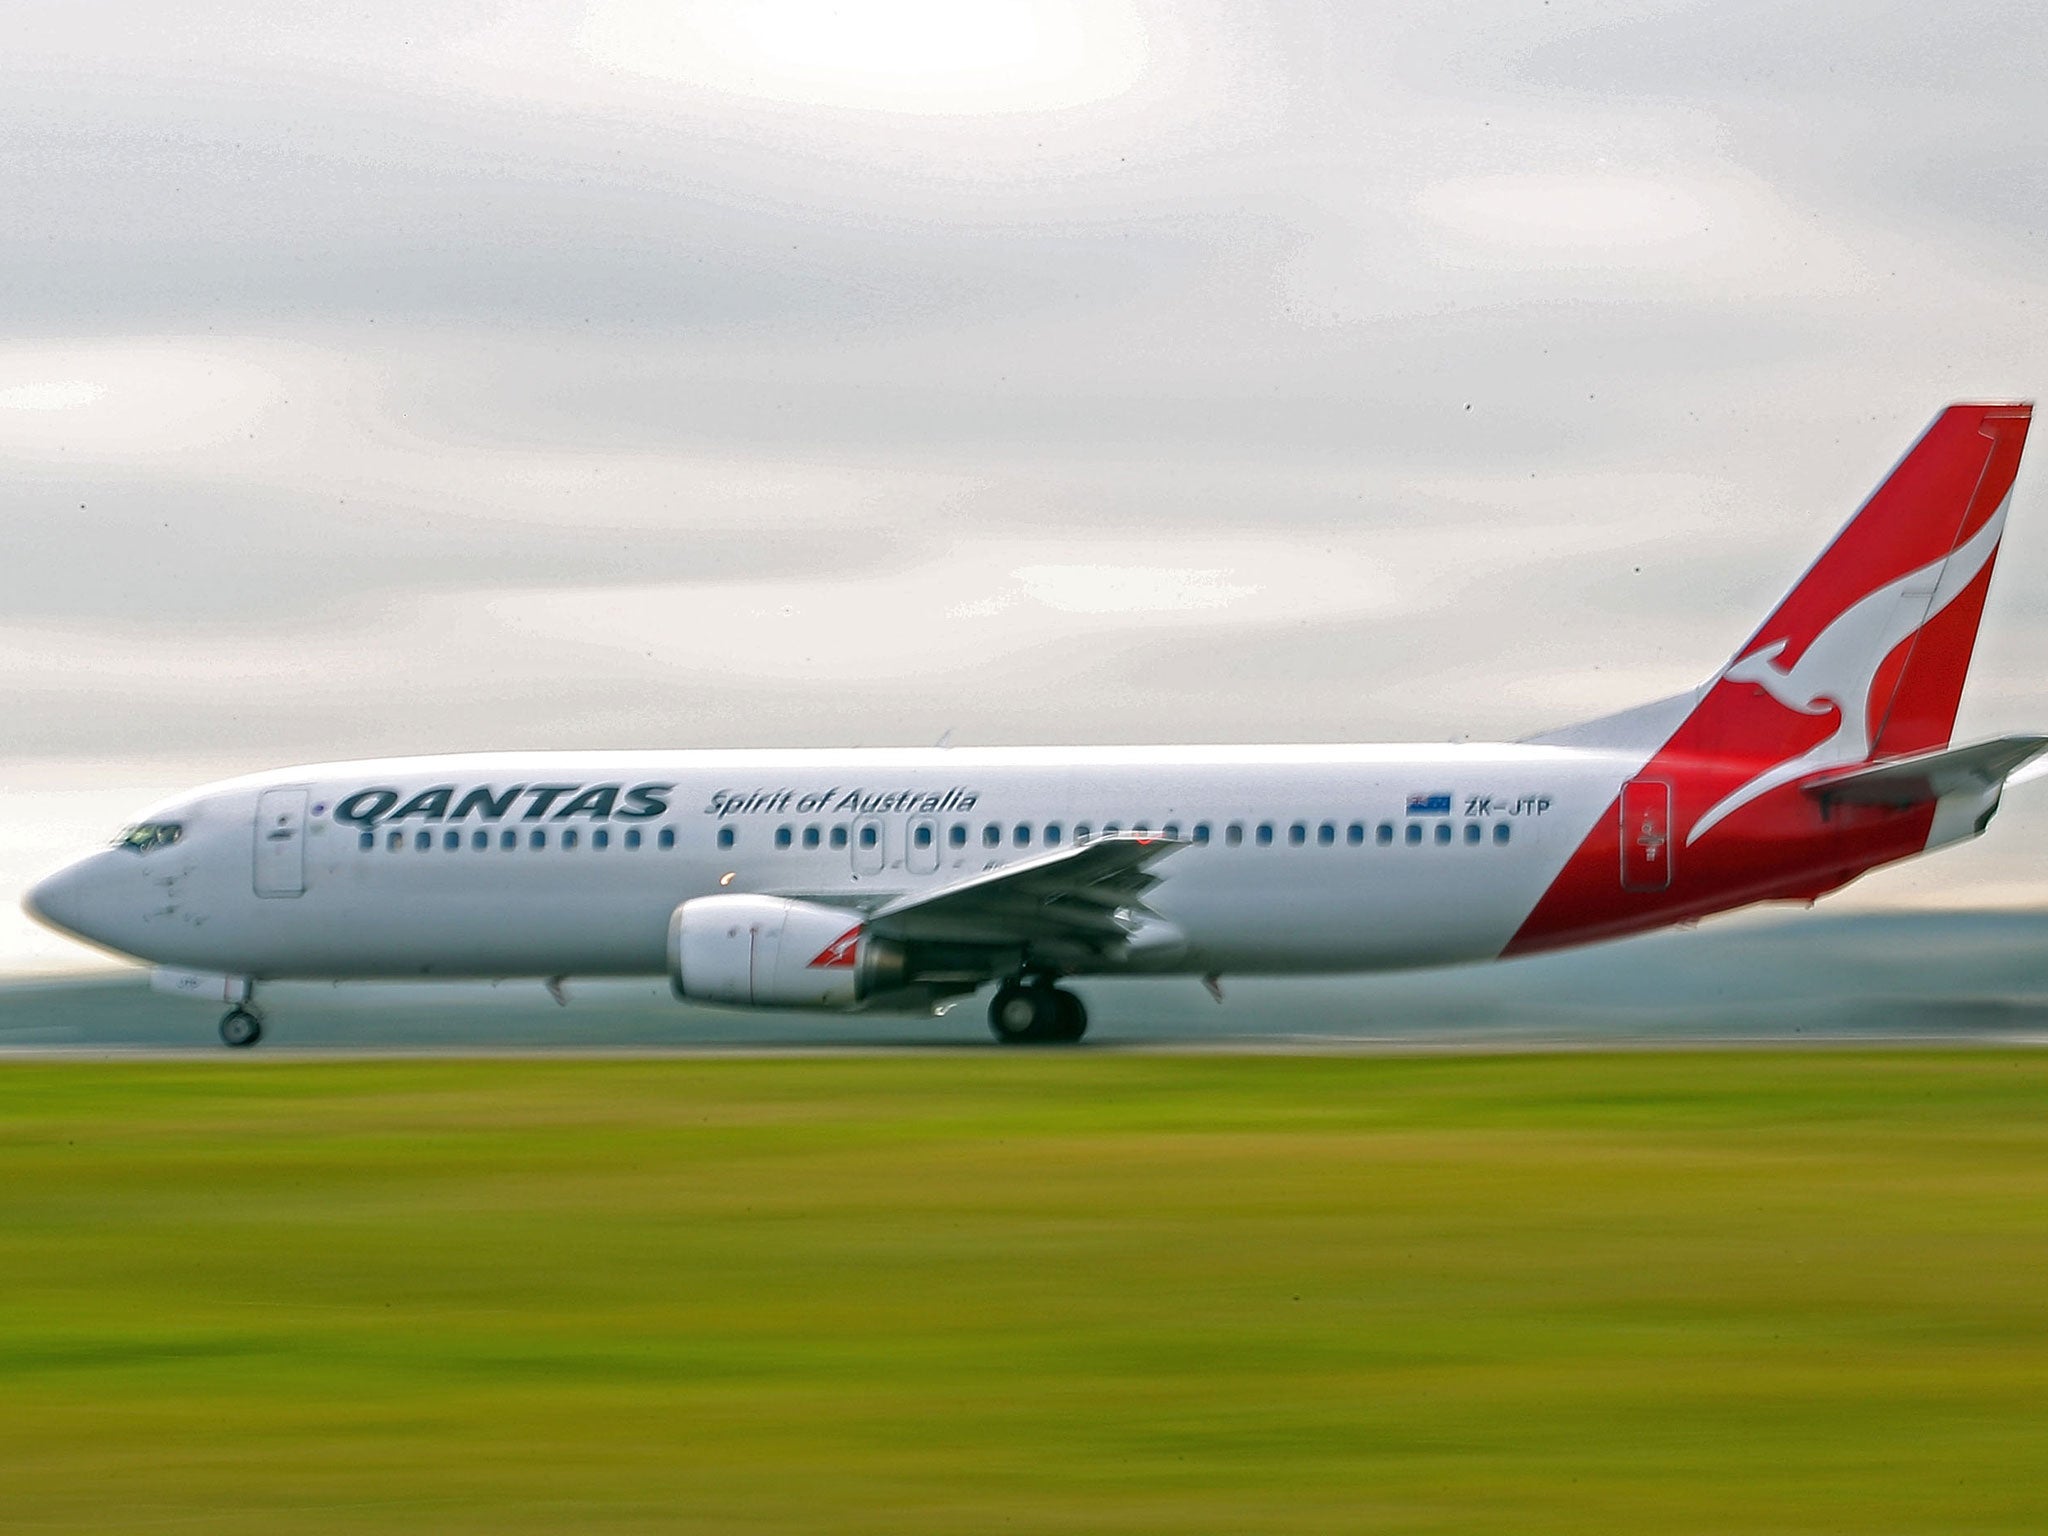 A Qantas Airways plane was forced to return back to Los Angeles when a burst pipe sent a “river” of water down the aisles and drenched passengers on board.